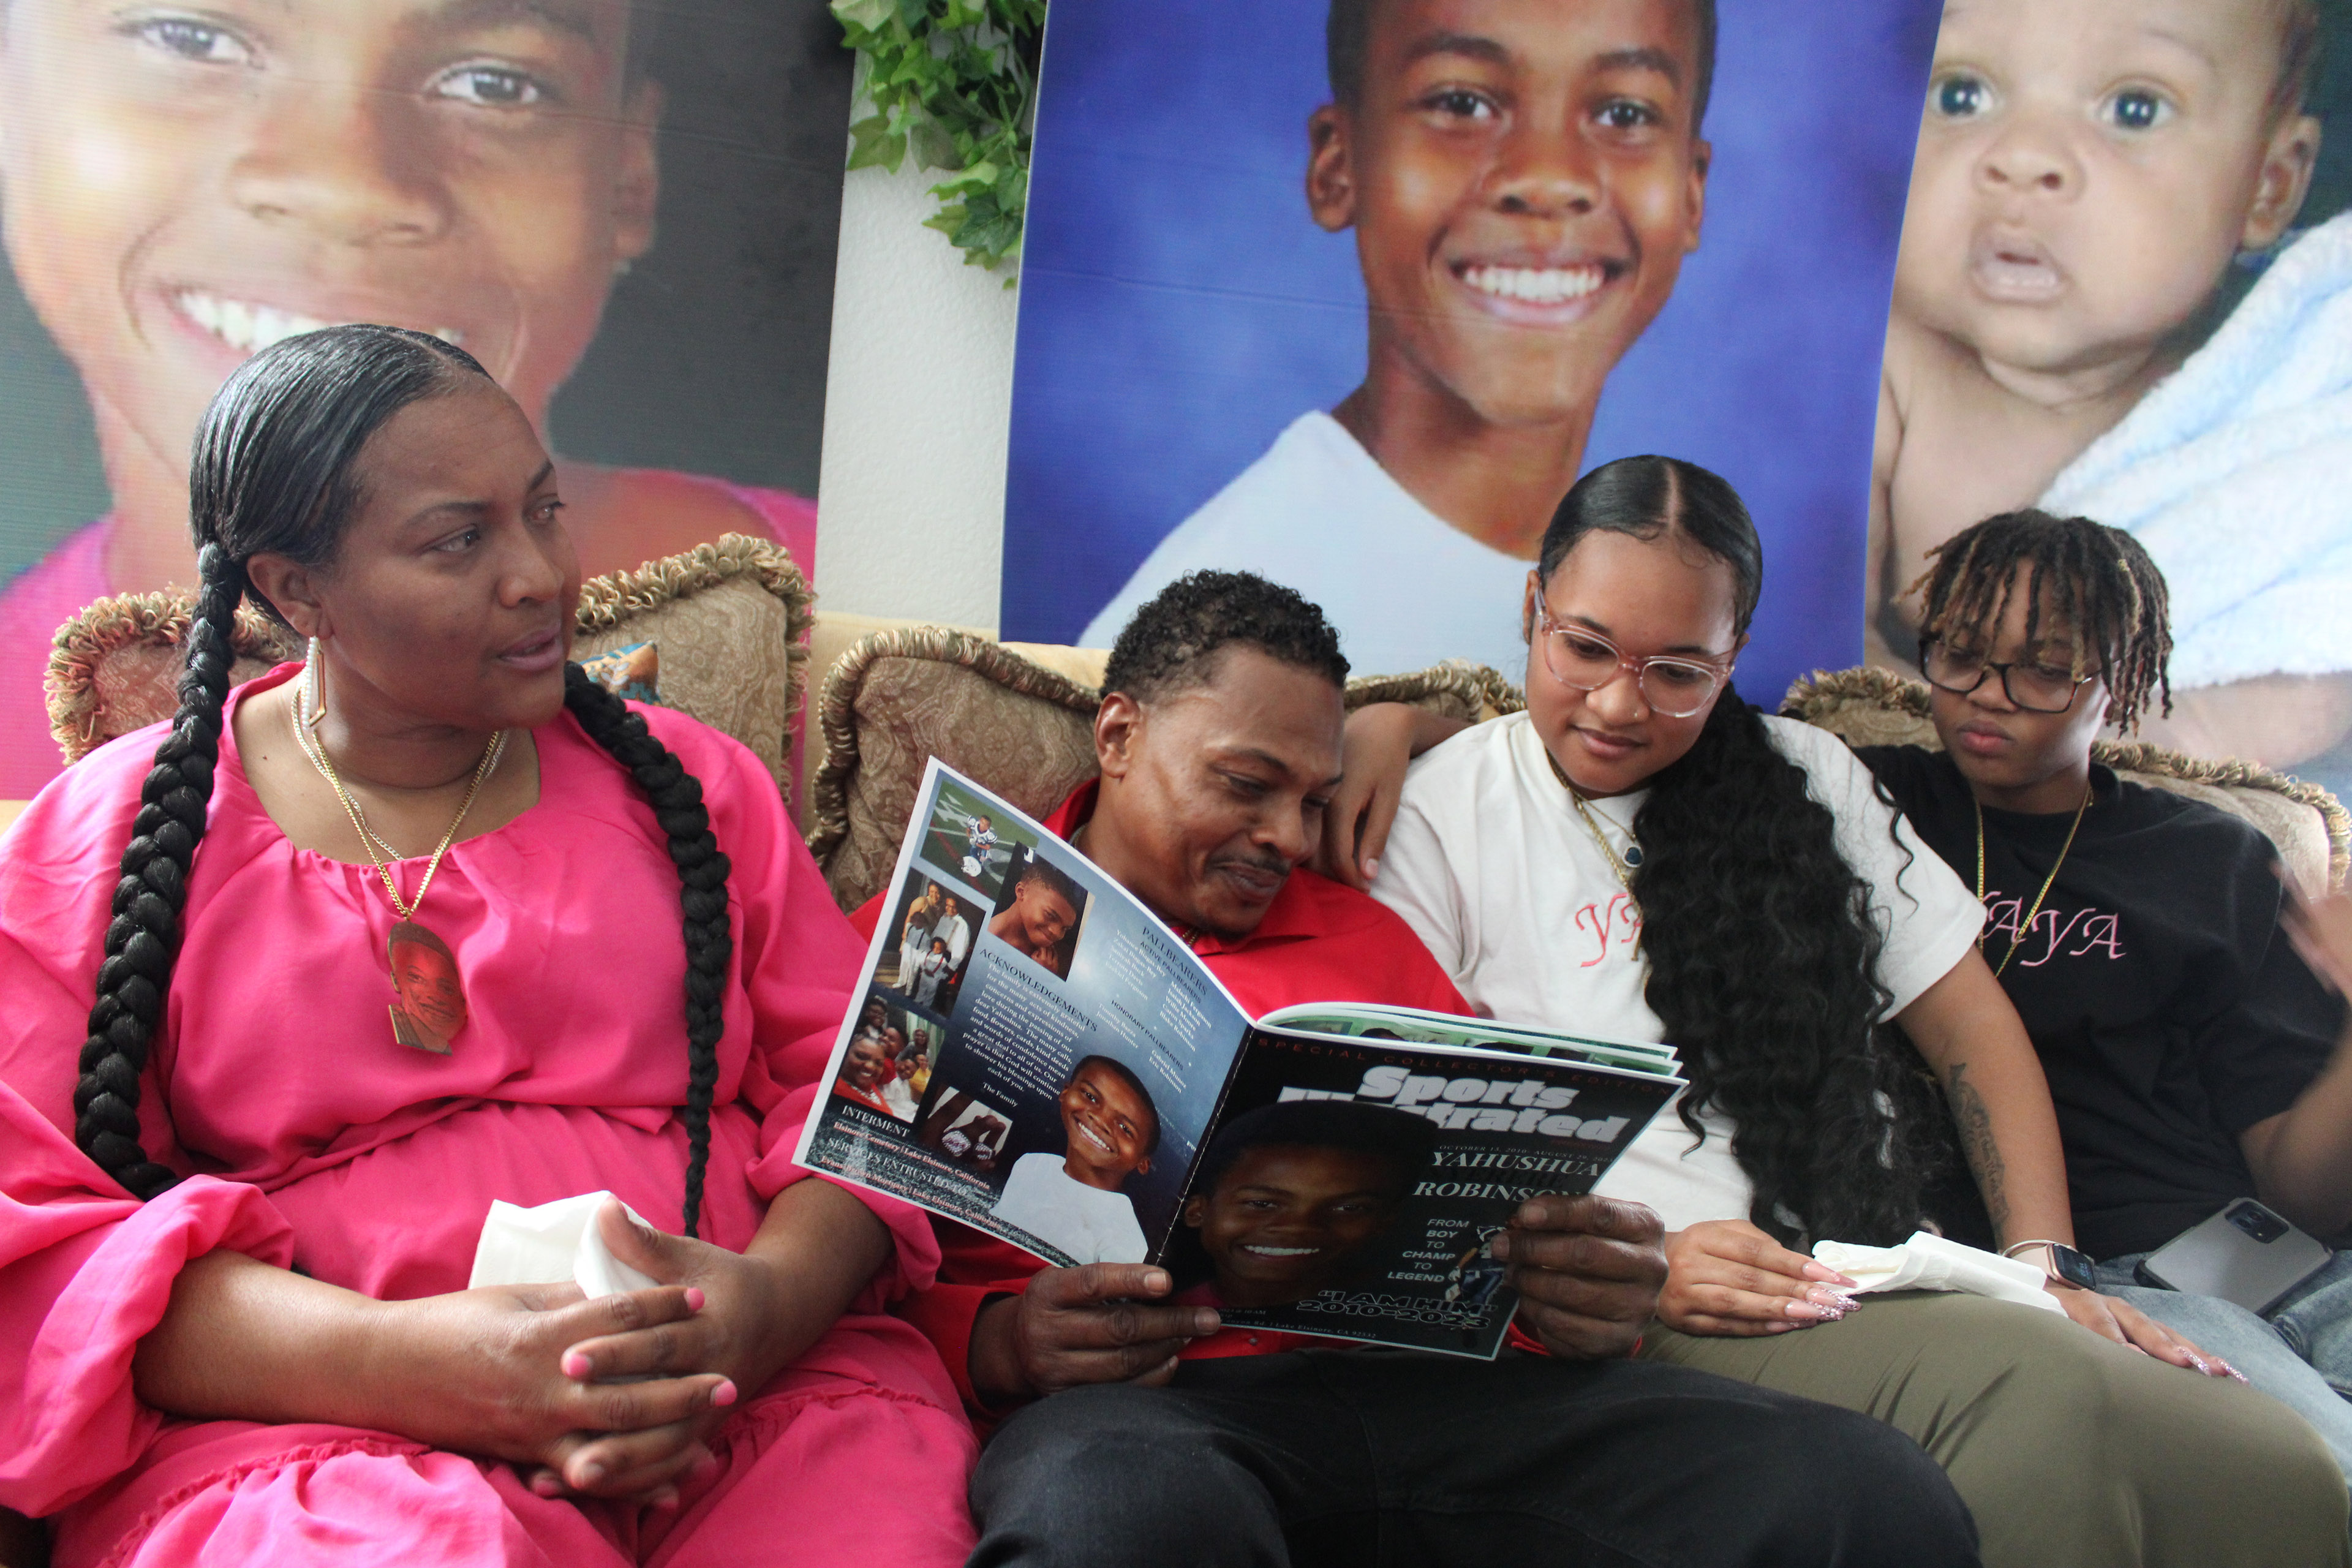 Janee and Eric Robinson sit on the couch with their two children. Together, they look at a photo album that Eric is holding. Behind them are large photographs of Yahushua Robinson at different ages.